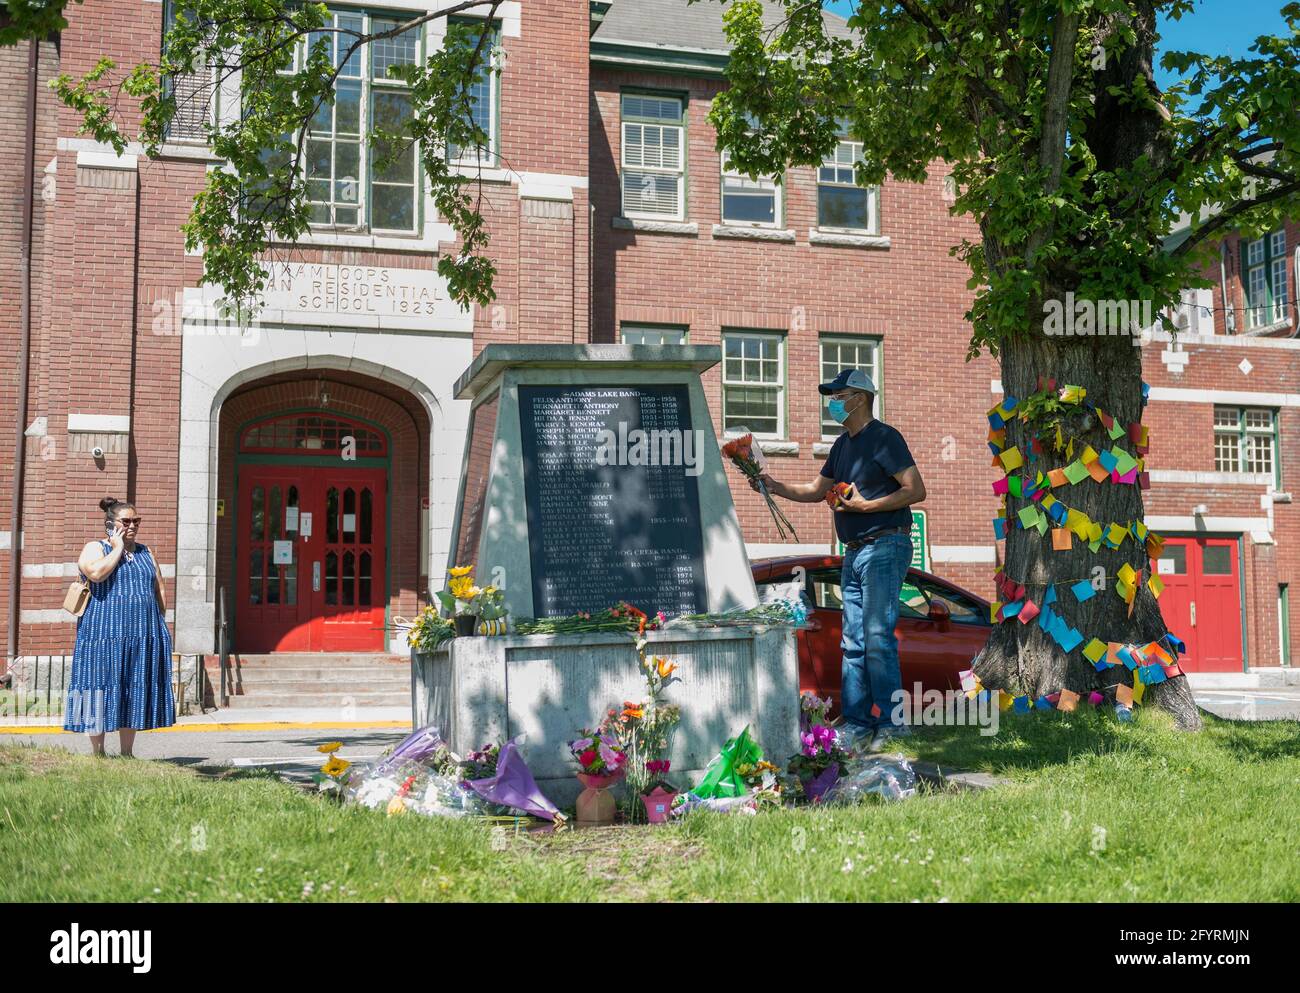 People Lay Flowers In Front Of The Administration Building At The Former Kamloops Indian Residential School After The Remains Of 215 Children Some As Young As Three Years Old Were Found At